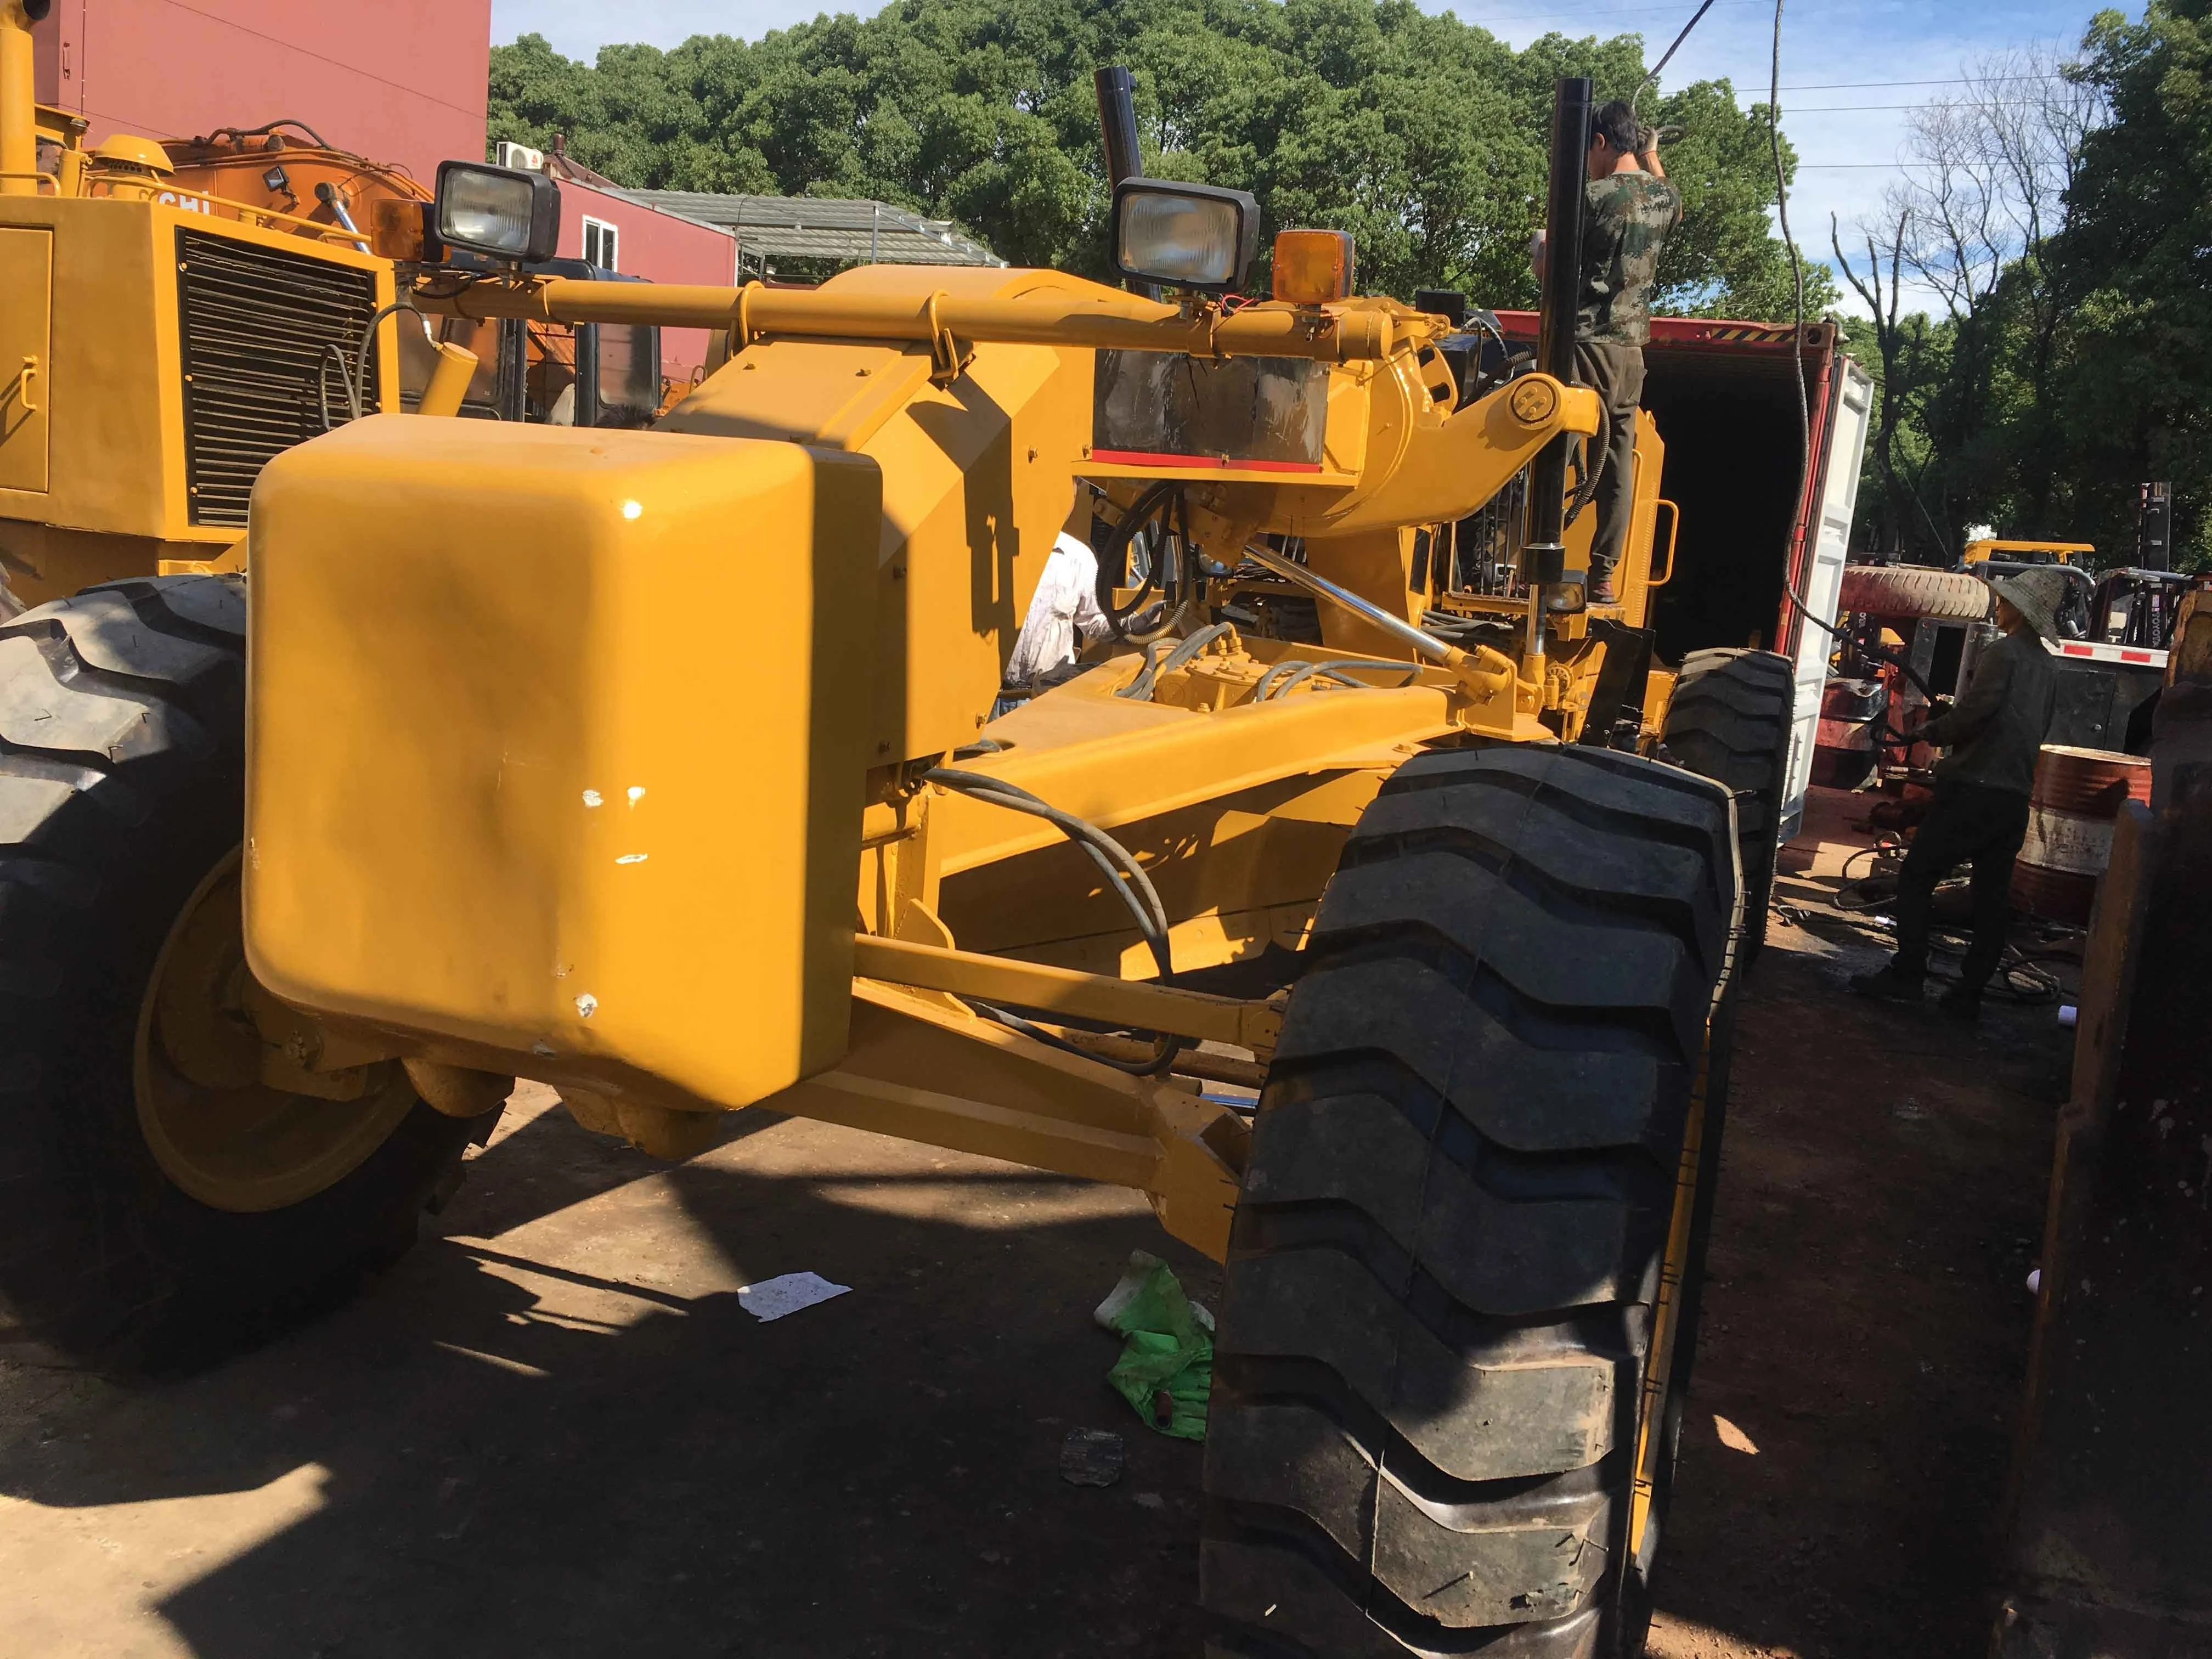 High good quality Cat 140G Road Machinery Motor Graders Made in Japan for Sale